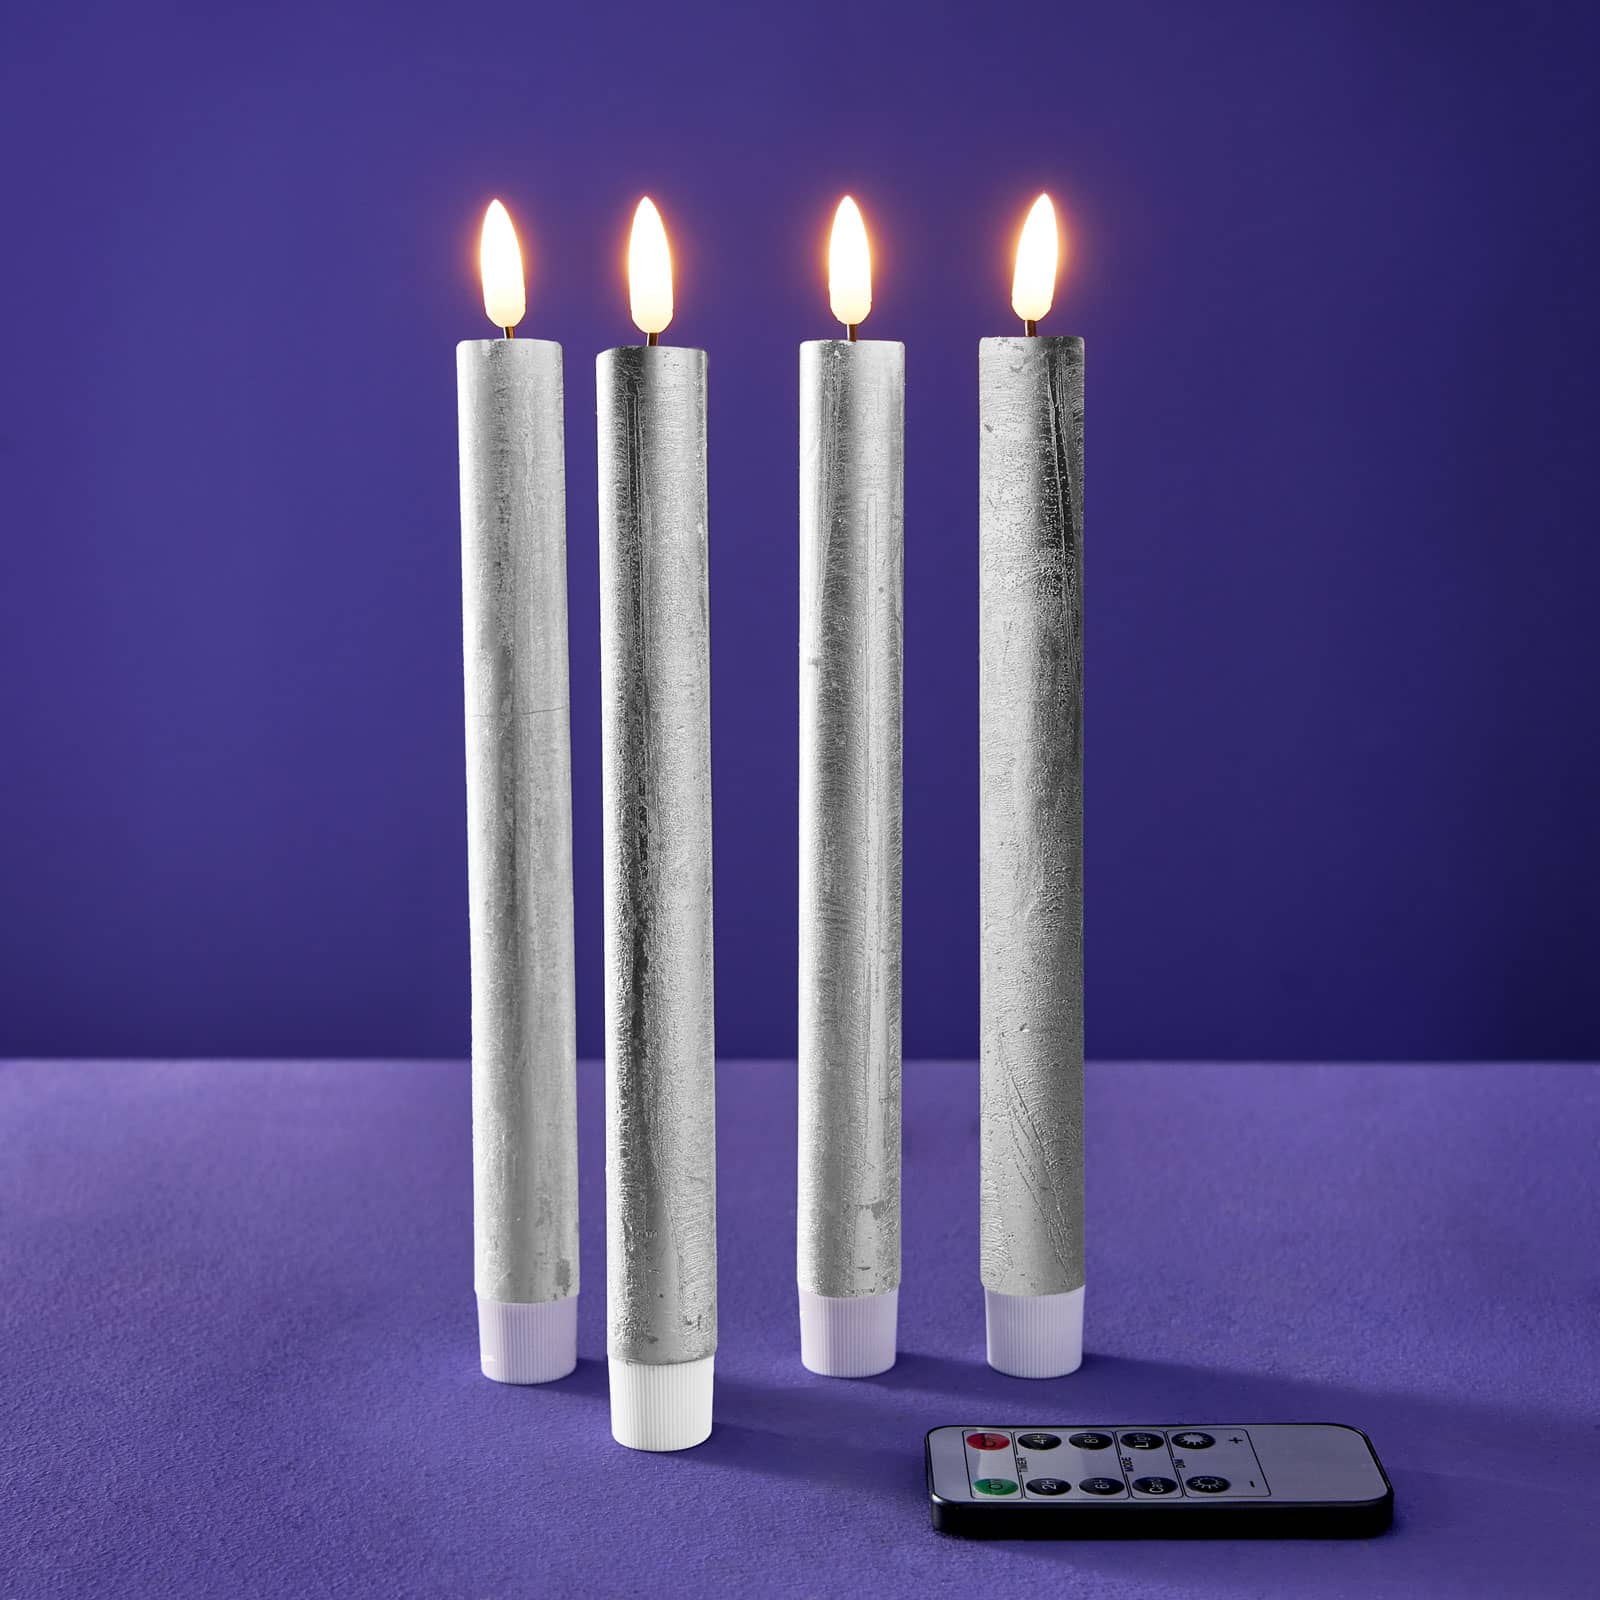 Set of 4 LED candles, silver